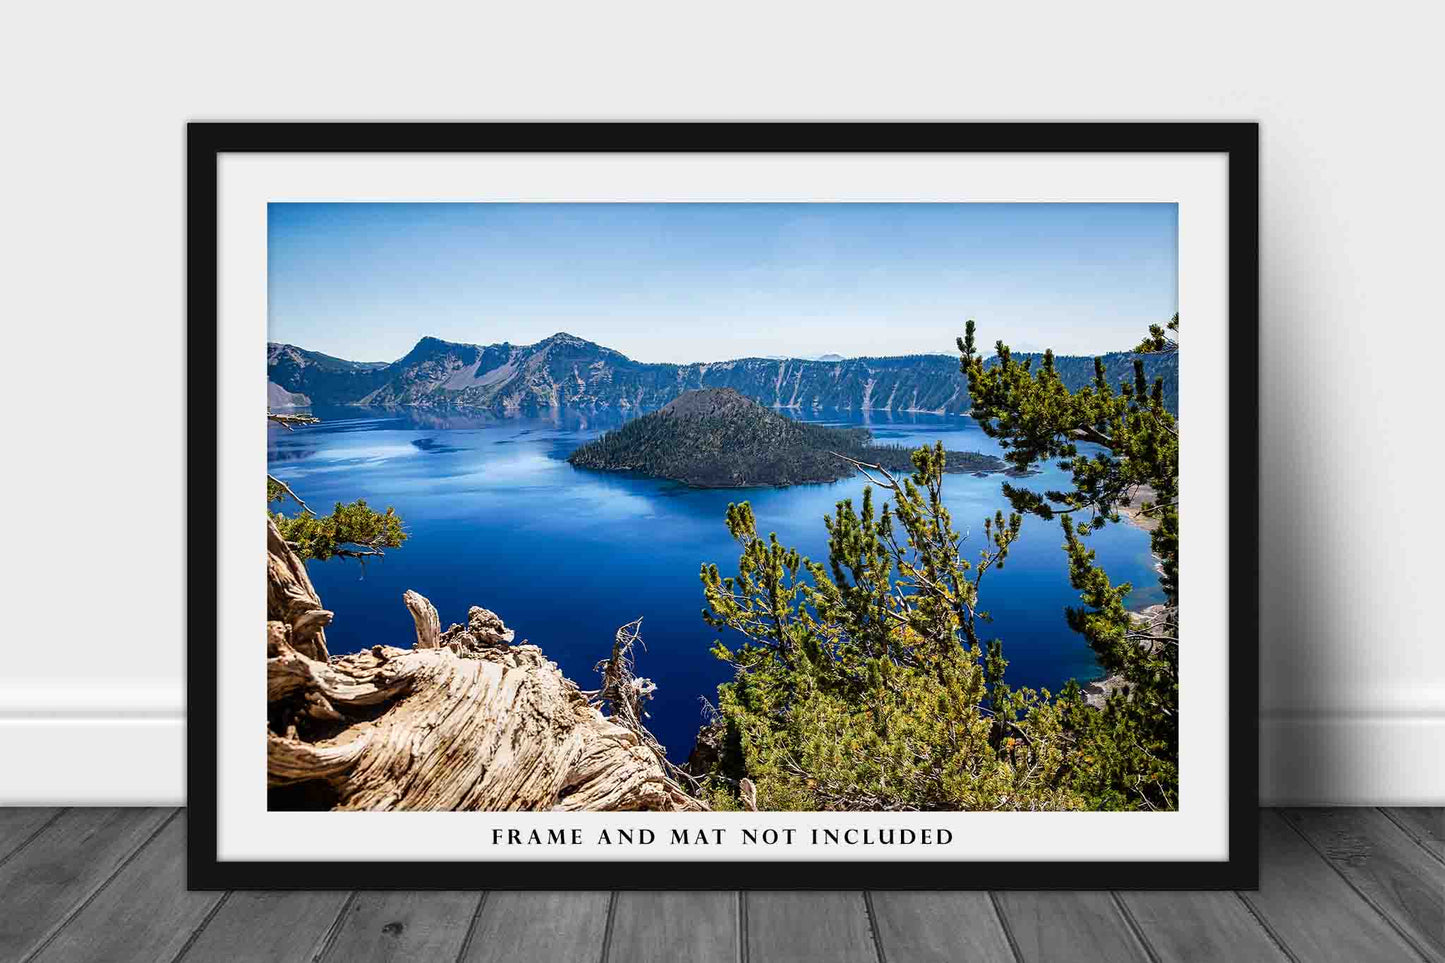 Crater Lake Photography Print | Pacific Northwest Picture | Oregon Wall Art | Wizard Island Photo | Nature Decor | Not Framed